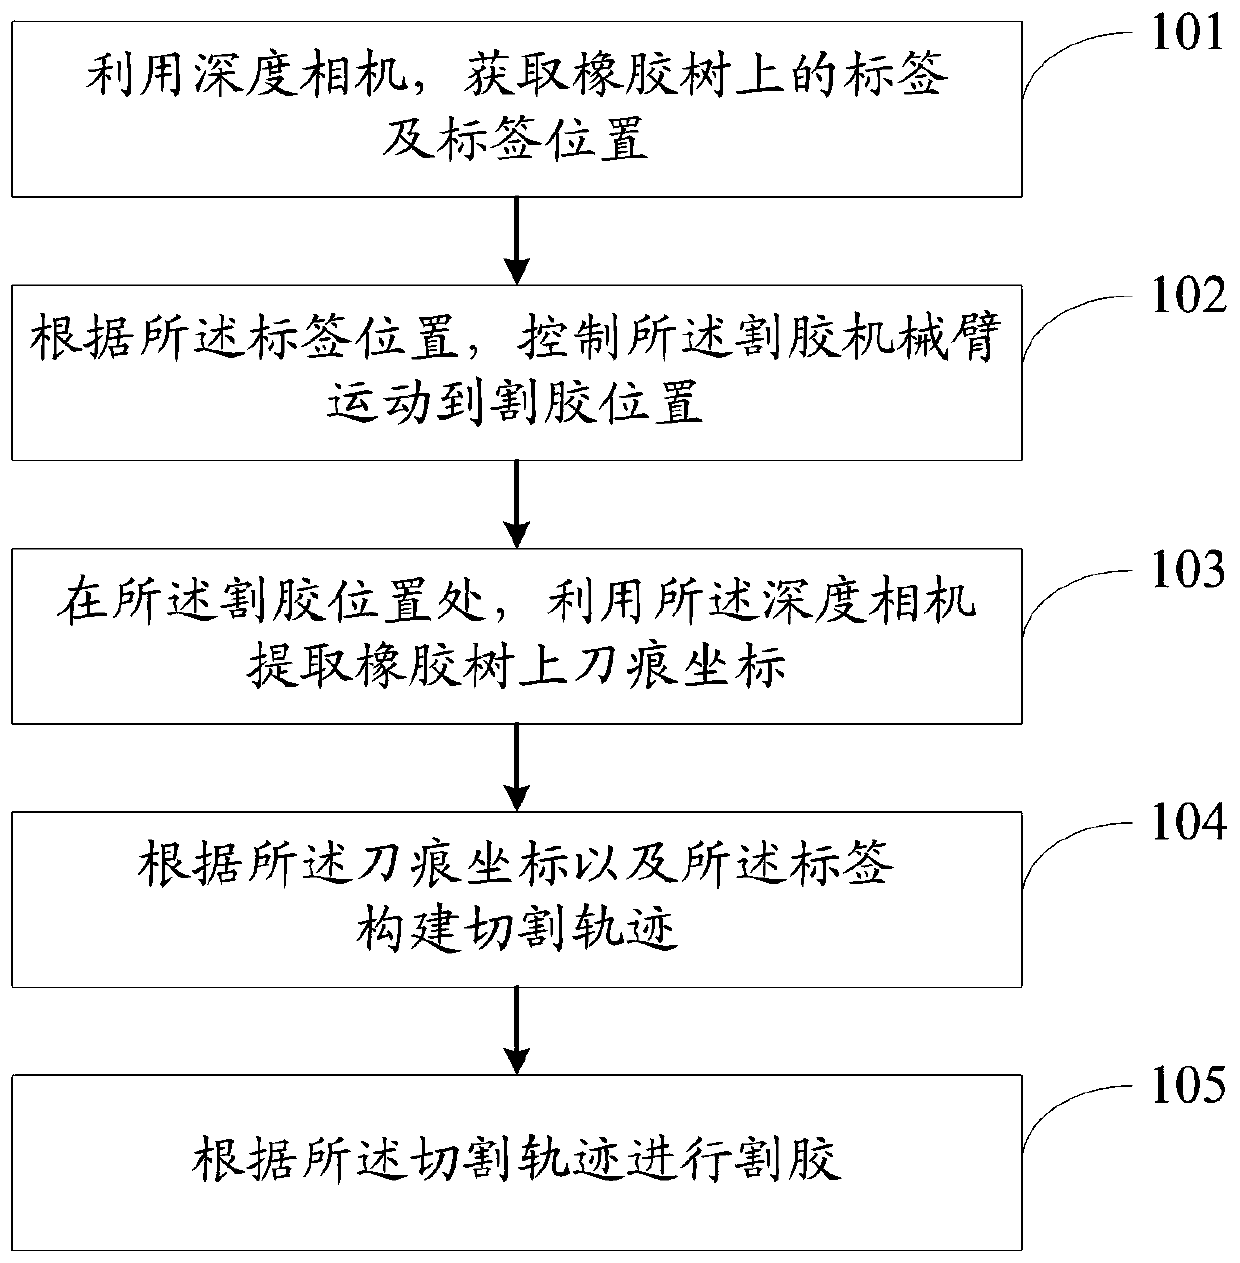 Rubber tapping method and system based on rubber tapping mechanical arm